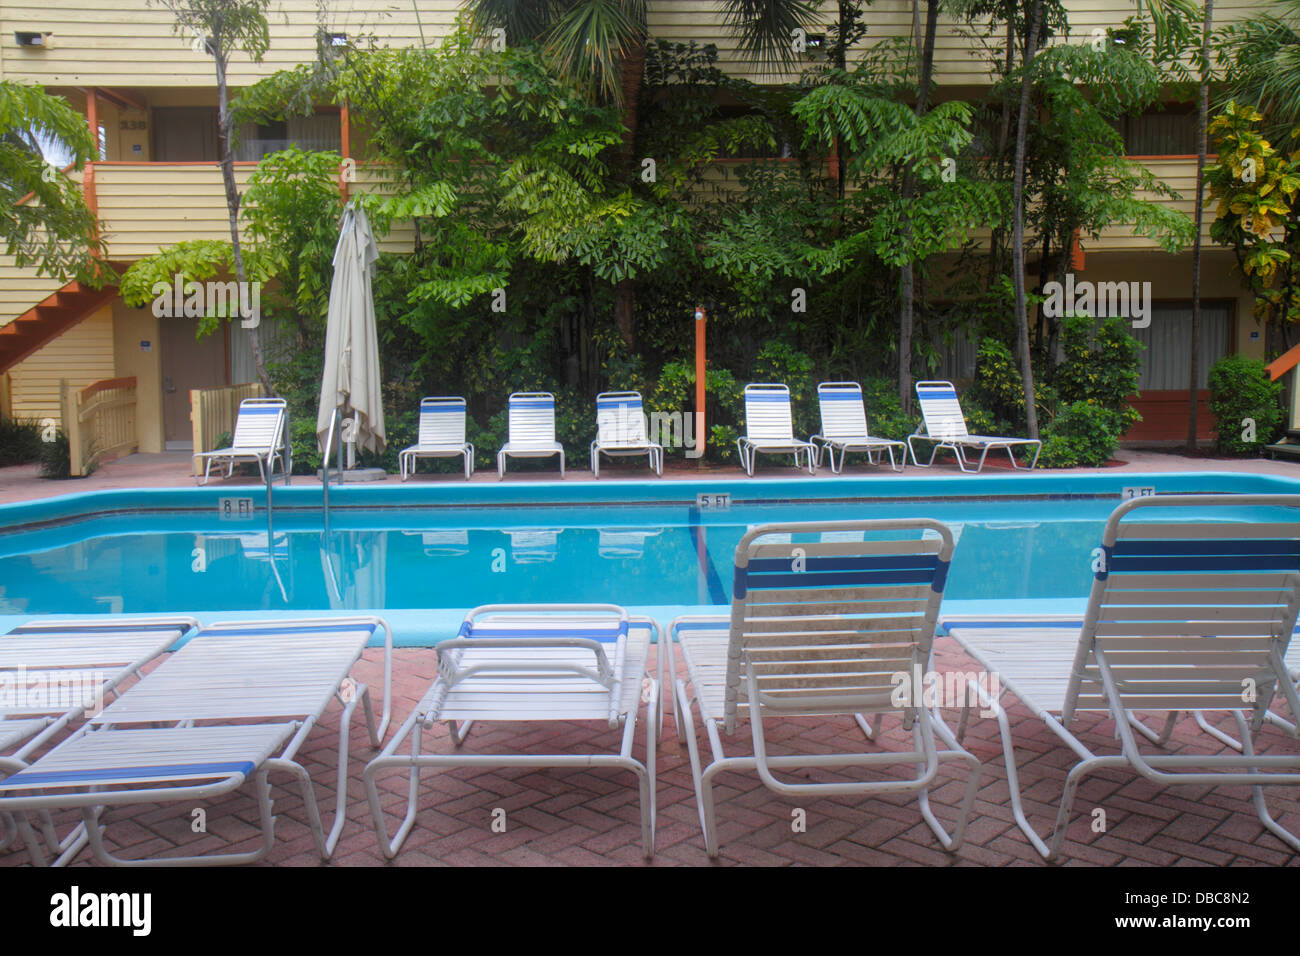 Fort Ft. Lauderdale Florida,Days Inn Bahia Cabana,motel,hotel,budget,swimming pool area,lounge chairs,looking FL130720134 Stock Photo